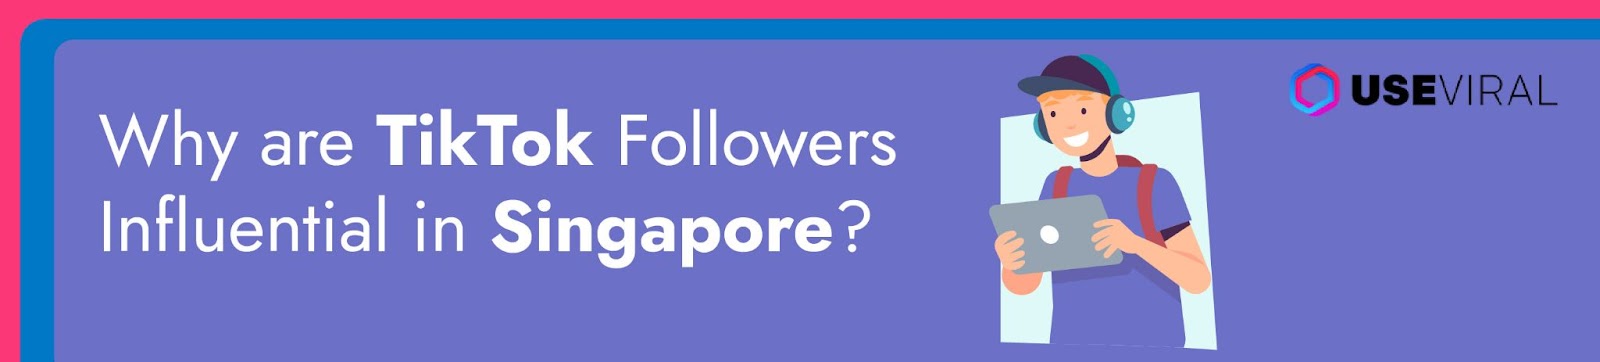 Why are TikTok followers influential in Singapore?